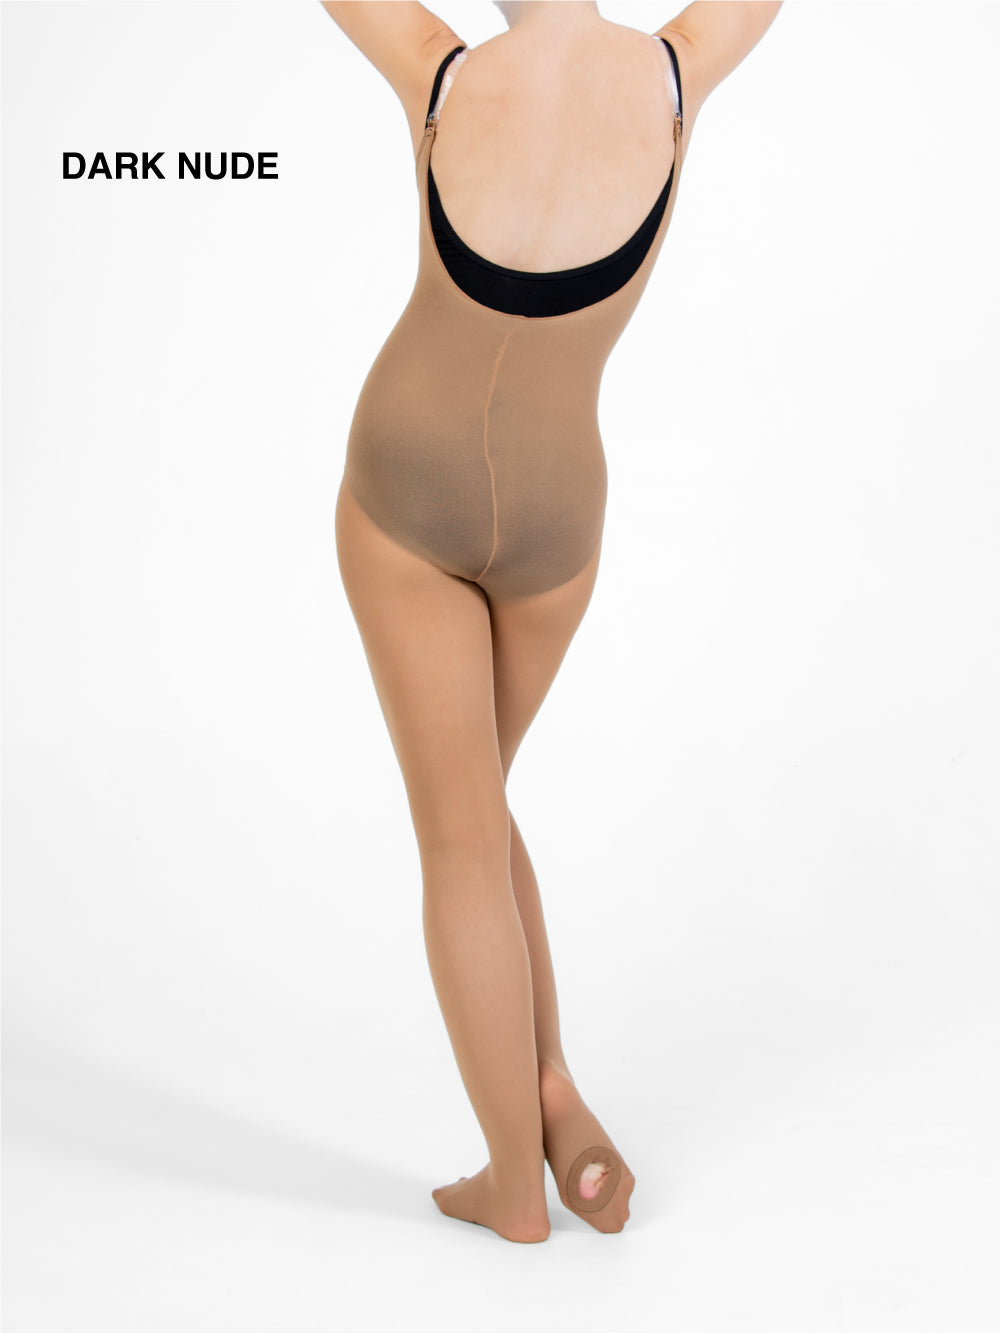 Body Wrappers A91 Convertible Full Body Tights - MK Dancewear